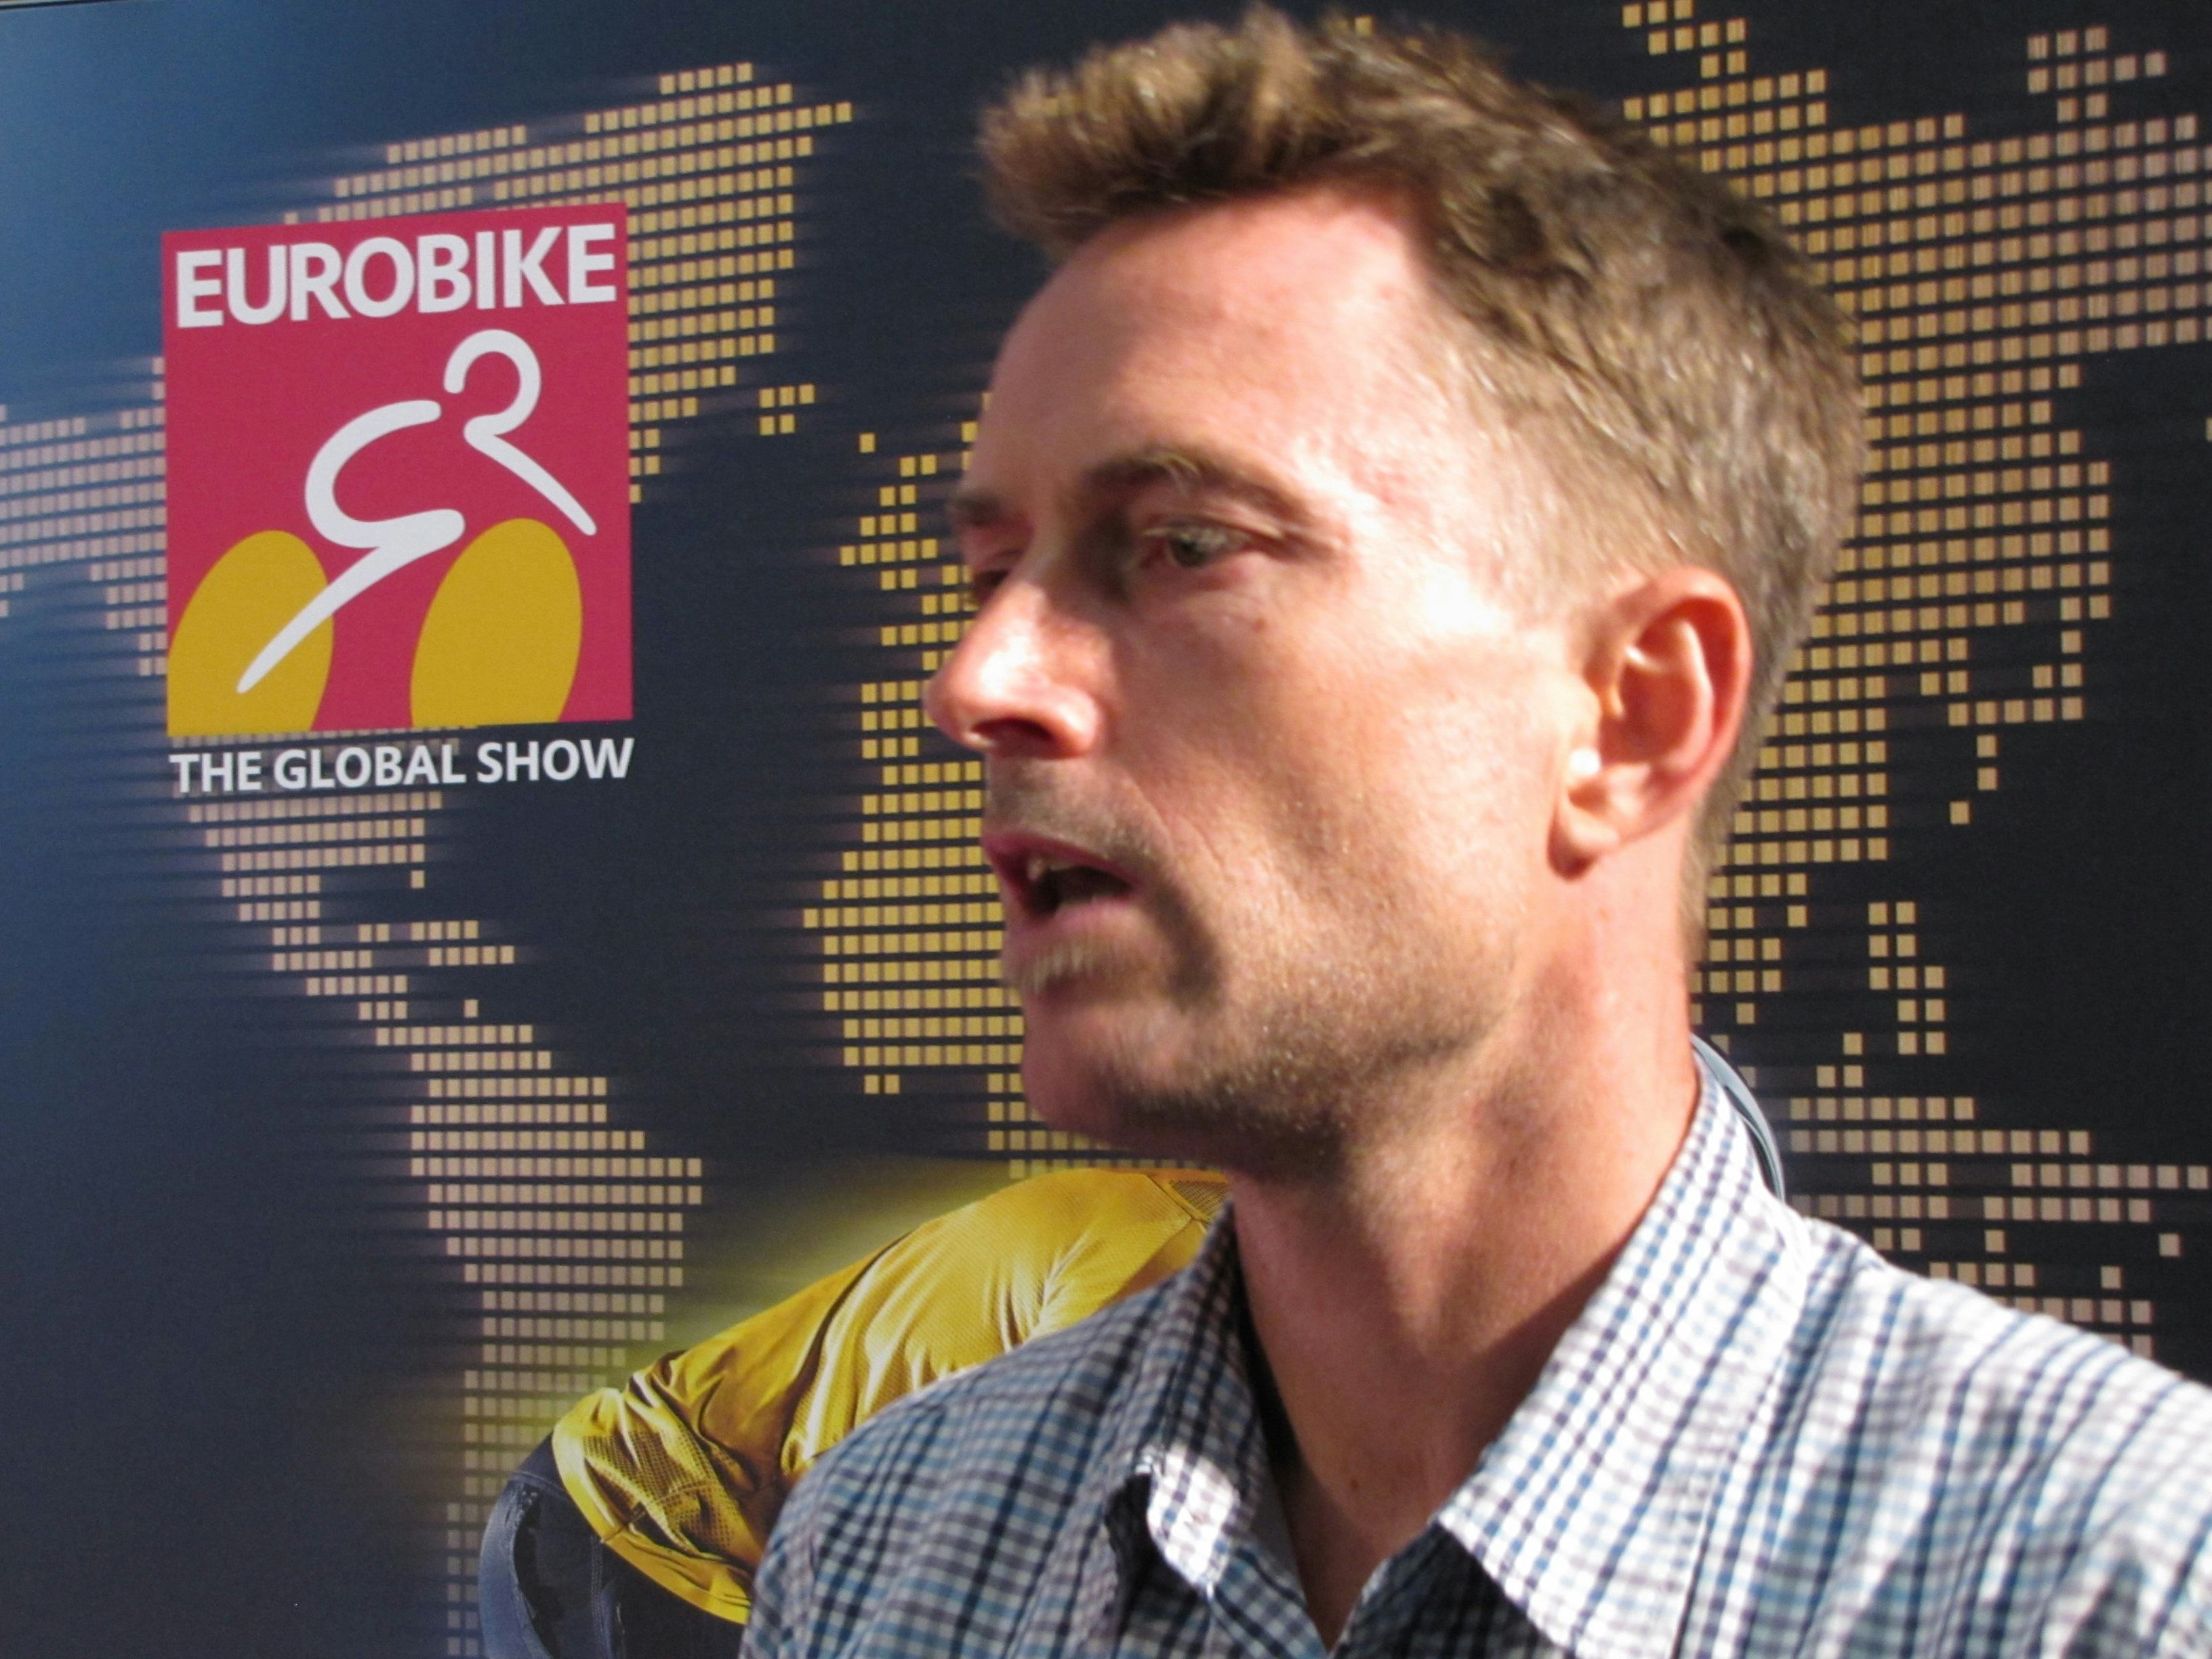 Eurobike division manager Stefan Reisinger: ‘New show strategy gets big encouragement from industry’. – Photo Bike Europe